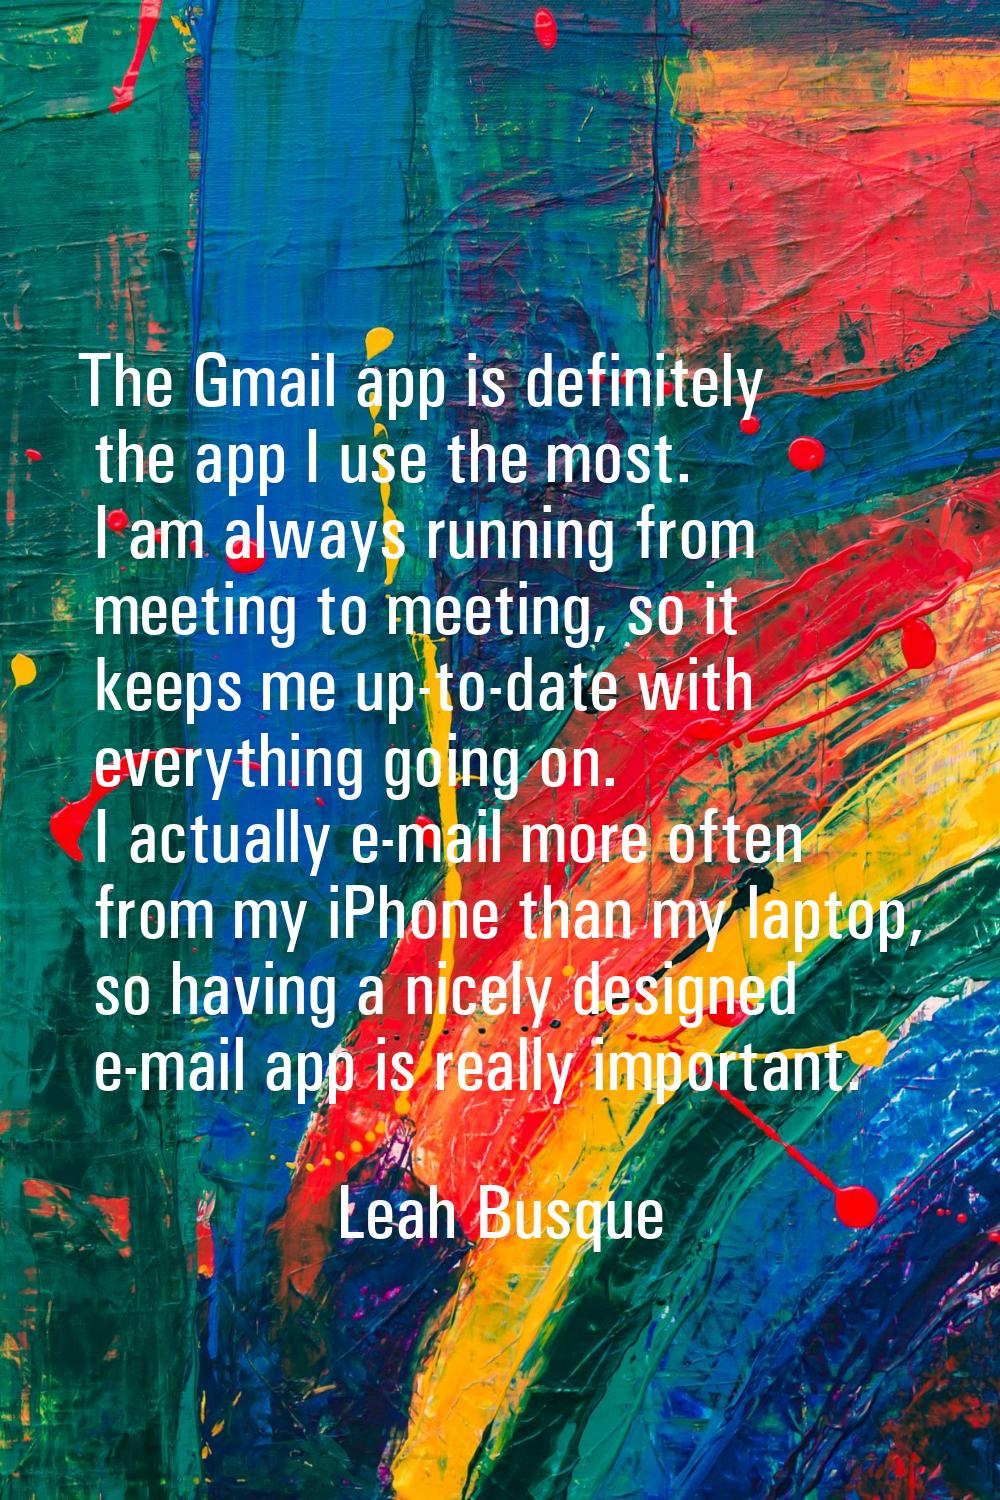 The Gmail app is definitely the app I use the most. I am always running from meeting to meeting, so